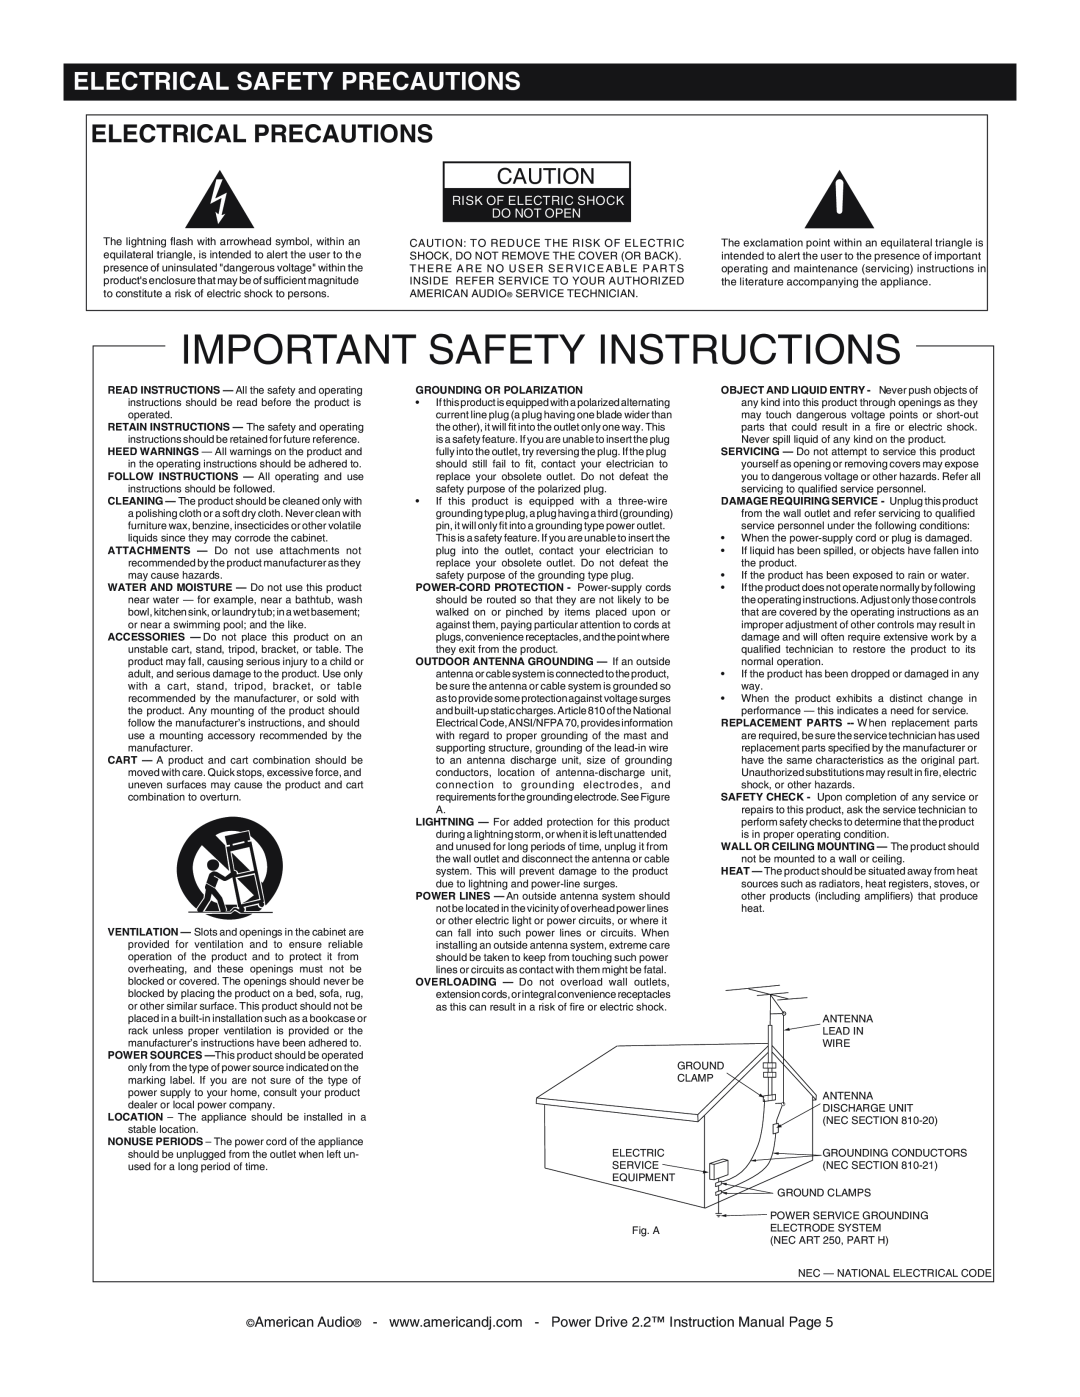 American Audio POWERDRIVE22.pdf manual Electrical Precautions, Important Safety Instructions, Electrical Safety Precautions 